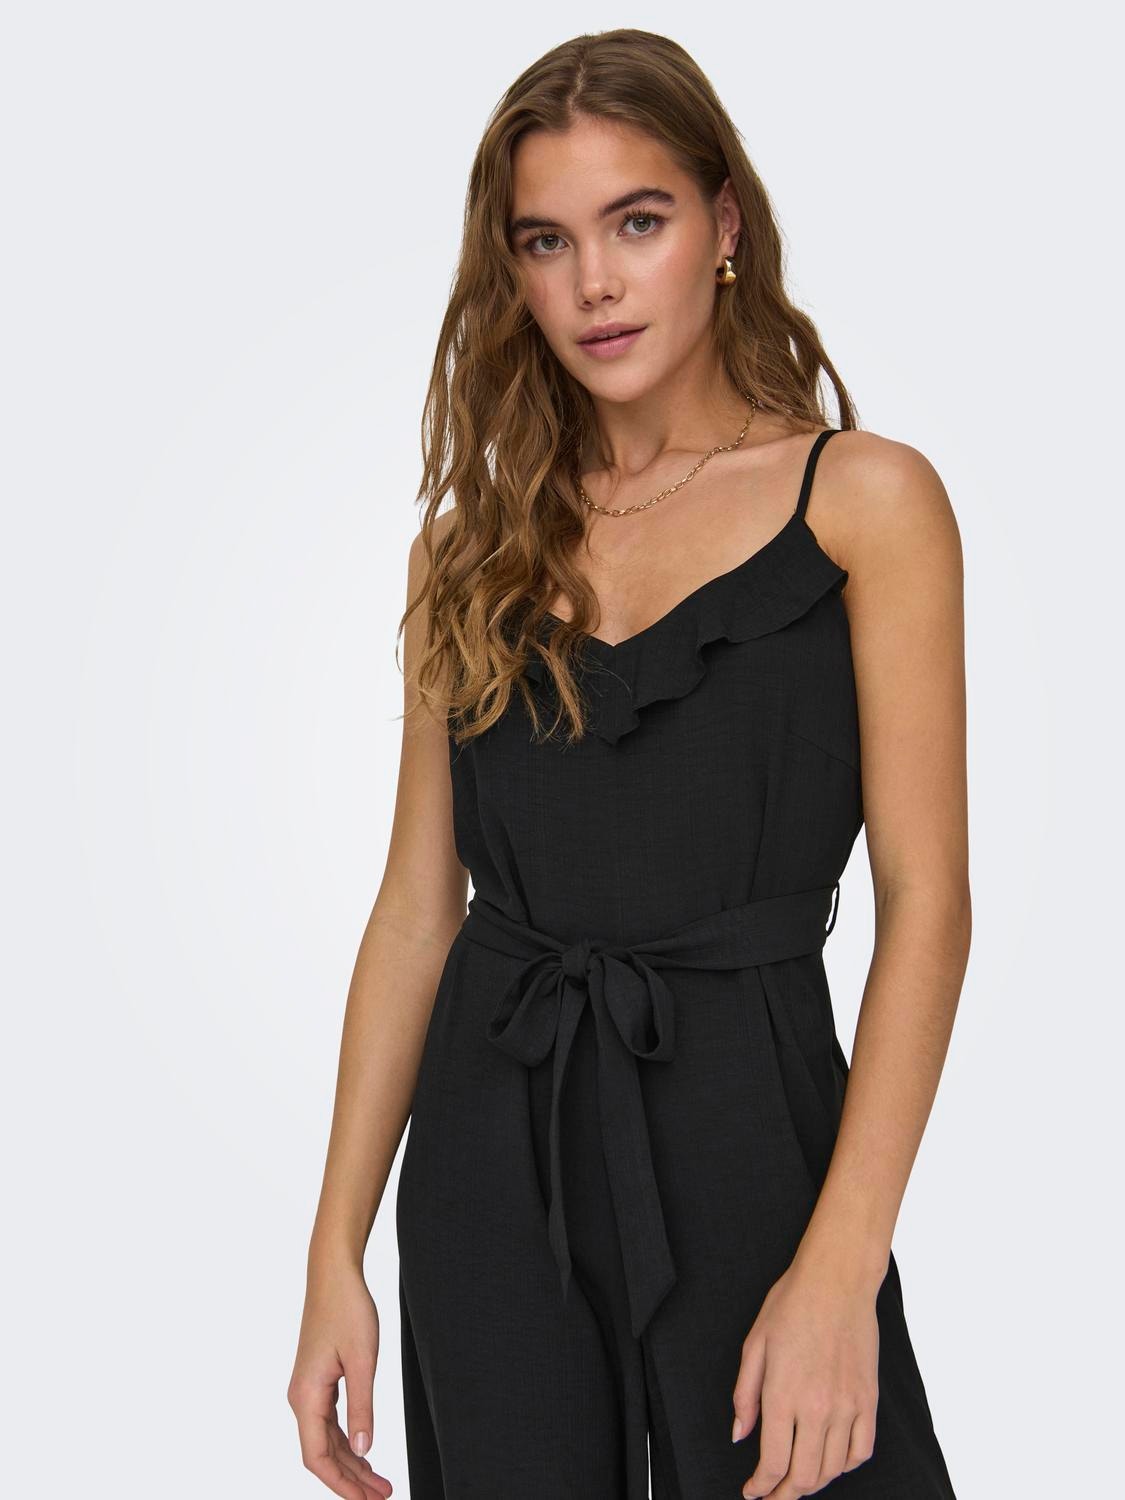 ONLY Jumpsuit with narrow straps -Black - 15325078